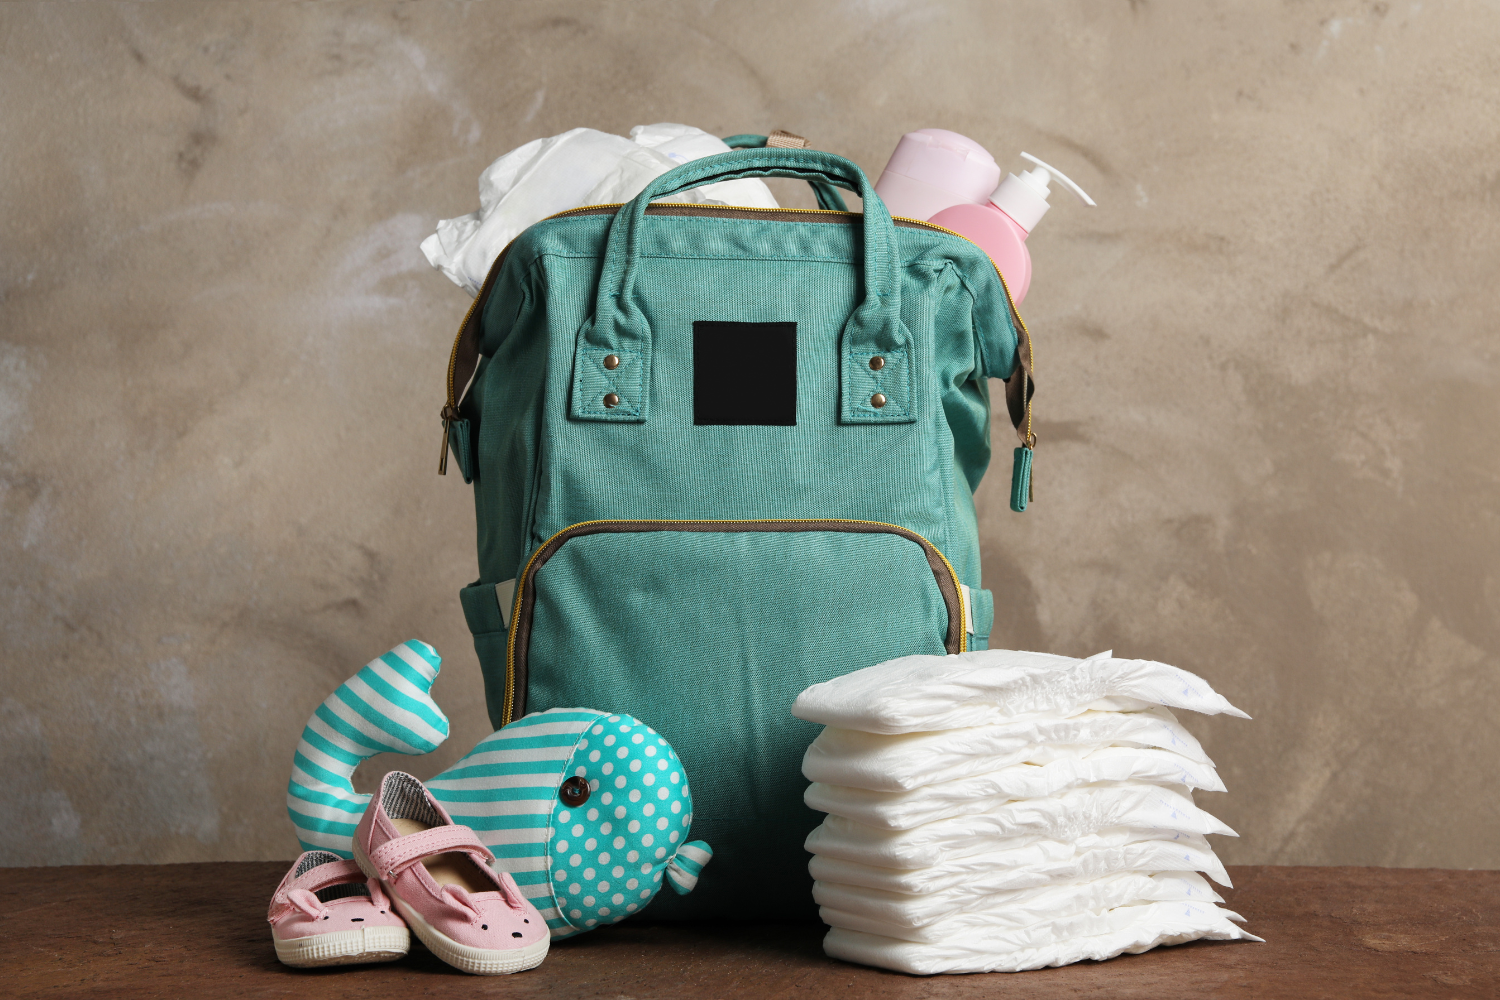 A Guide to Nappy Bag Essentials - Never Leave Home Without These